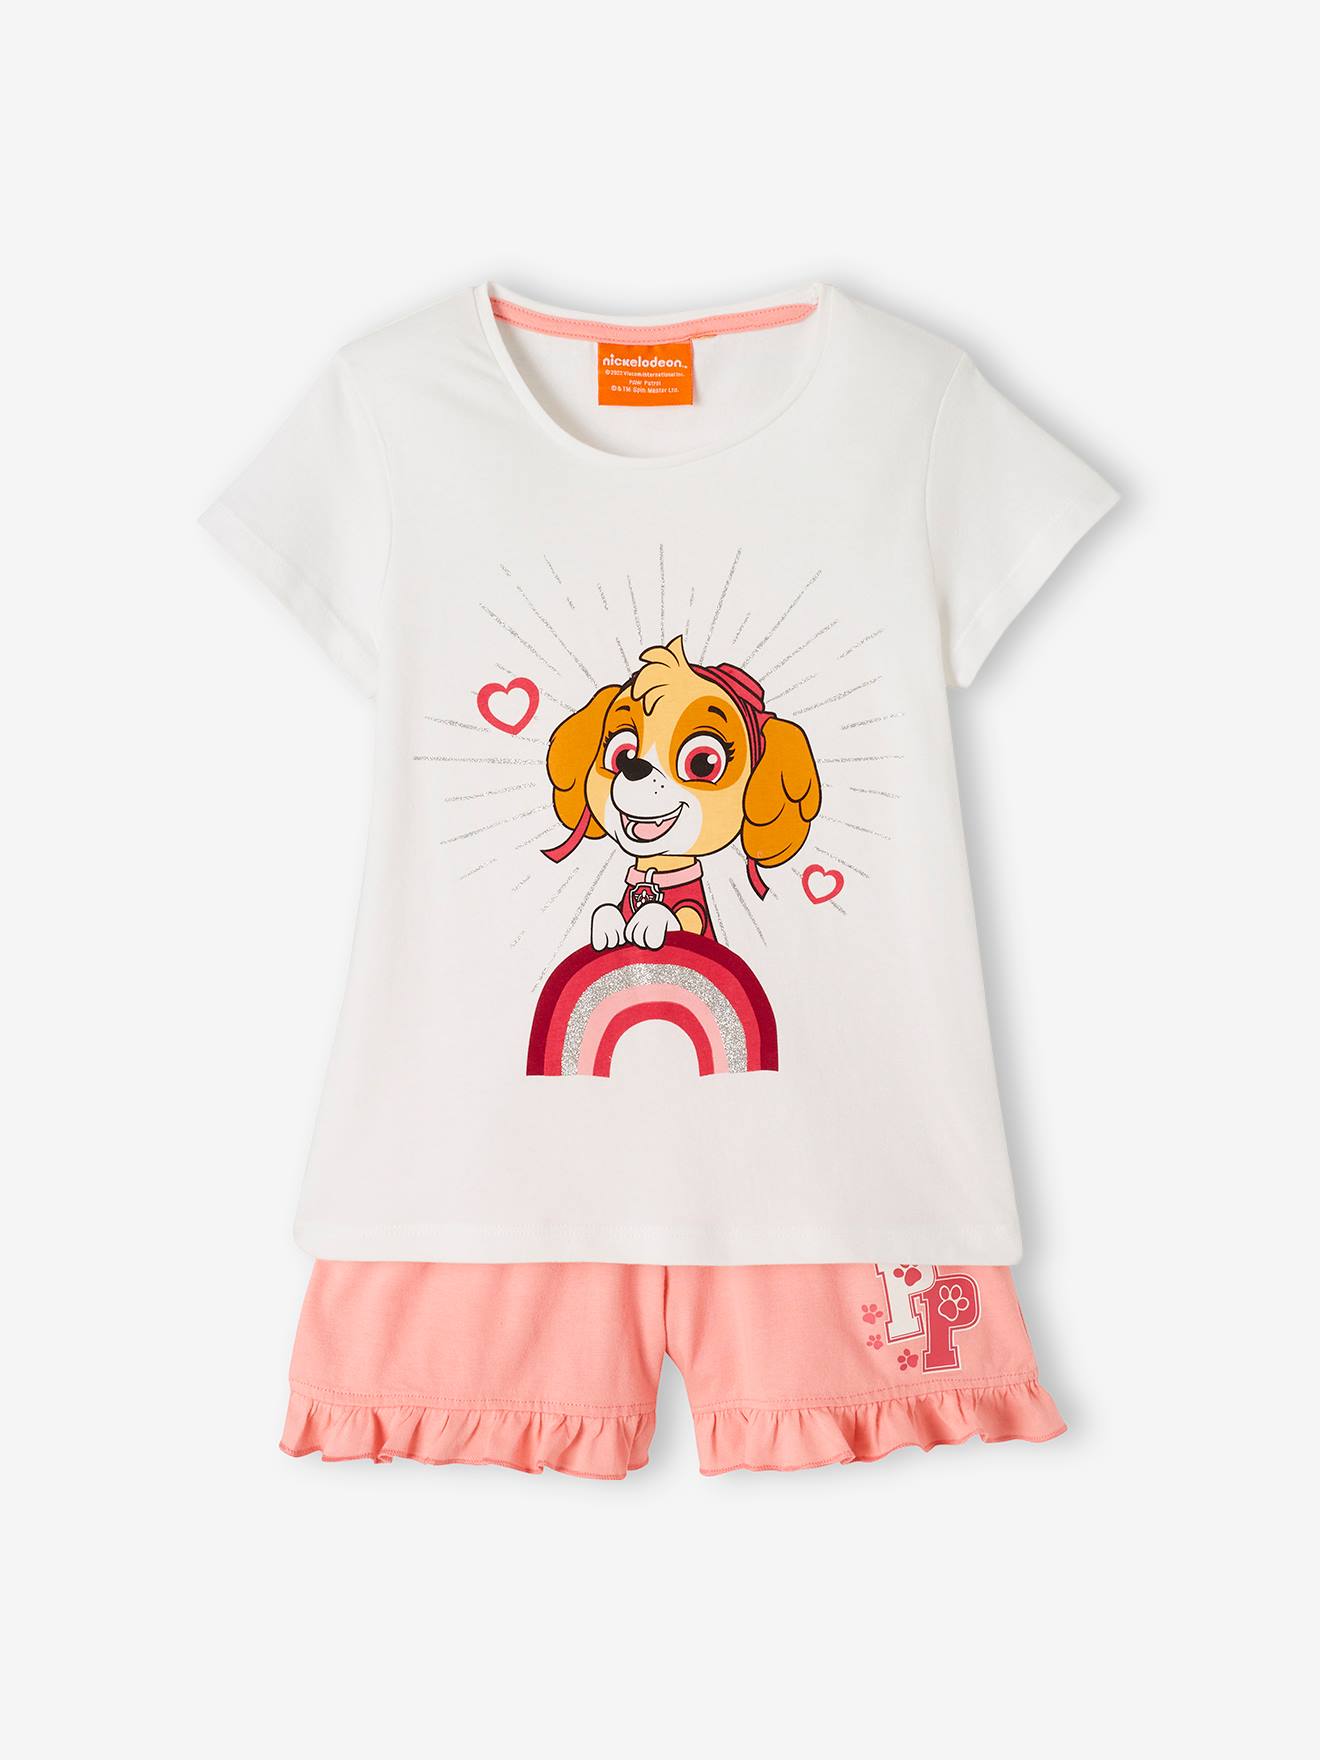 Paw Patrol(r) Pyjamas for Girls white light solid with design